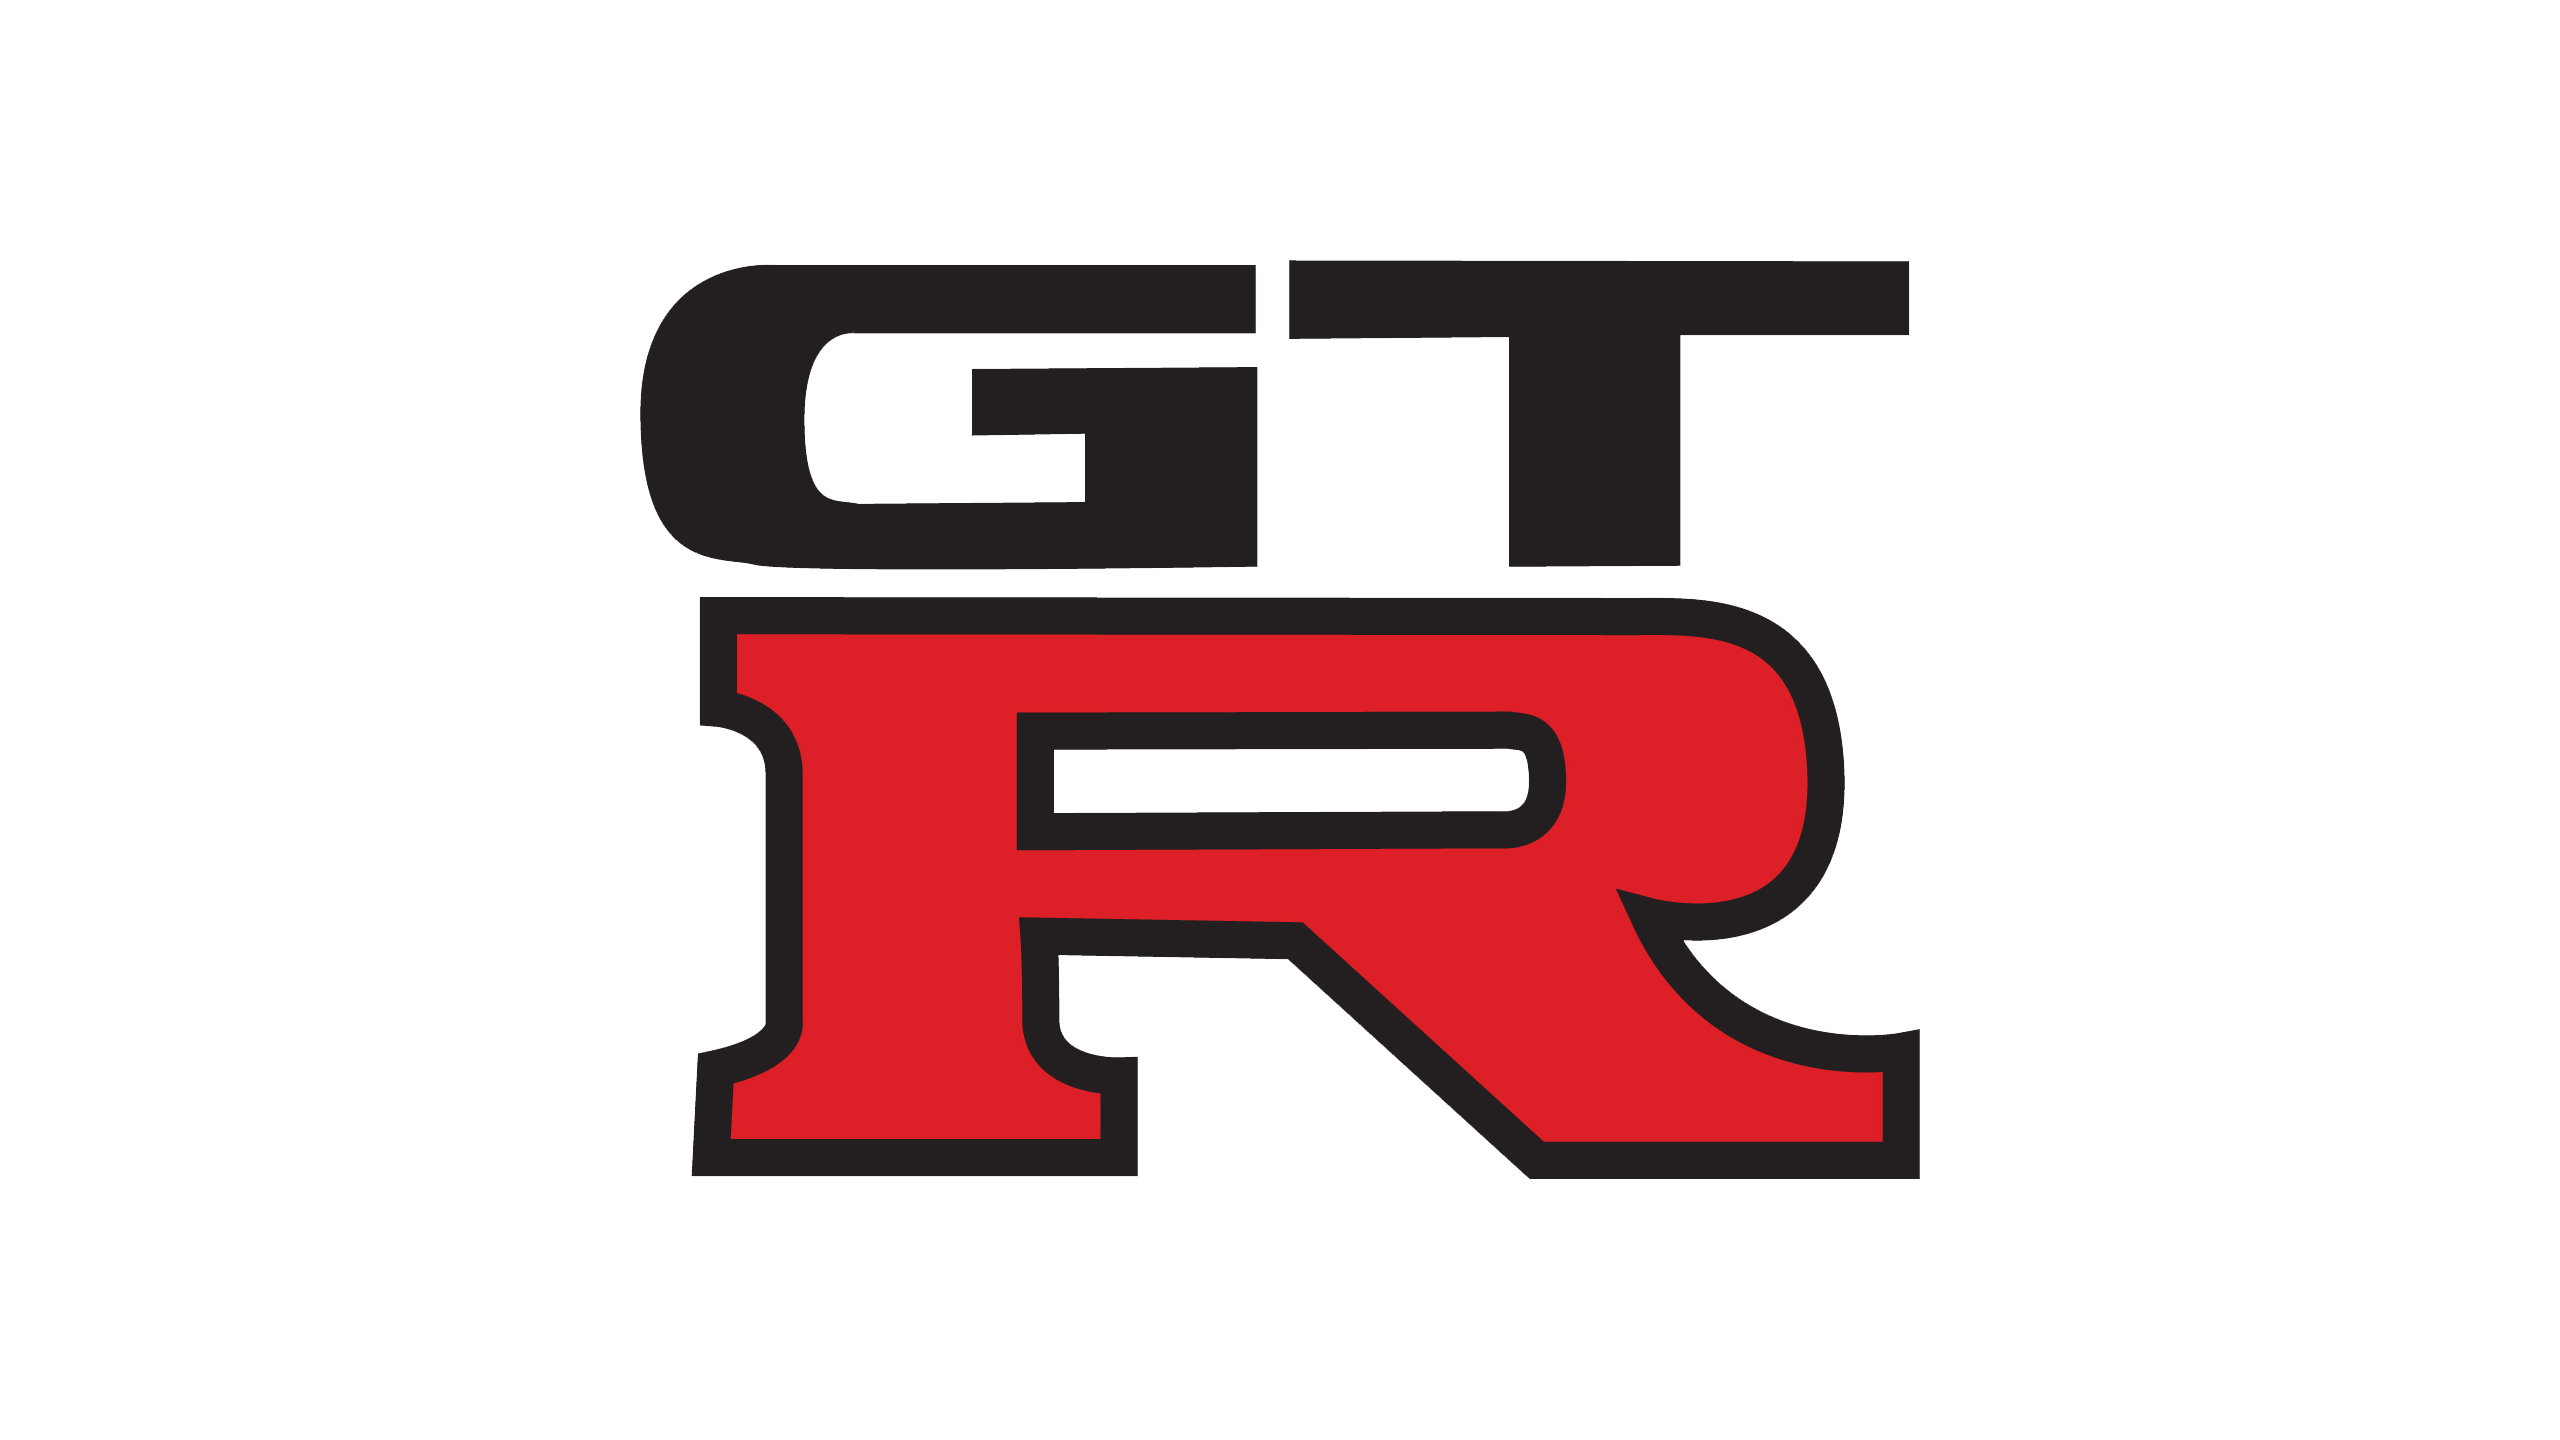 Skyline Gtr Logo Png - Pngtree offers over 277 skyline gtr png and ...